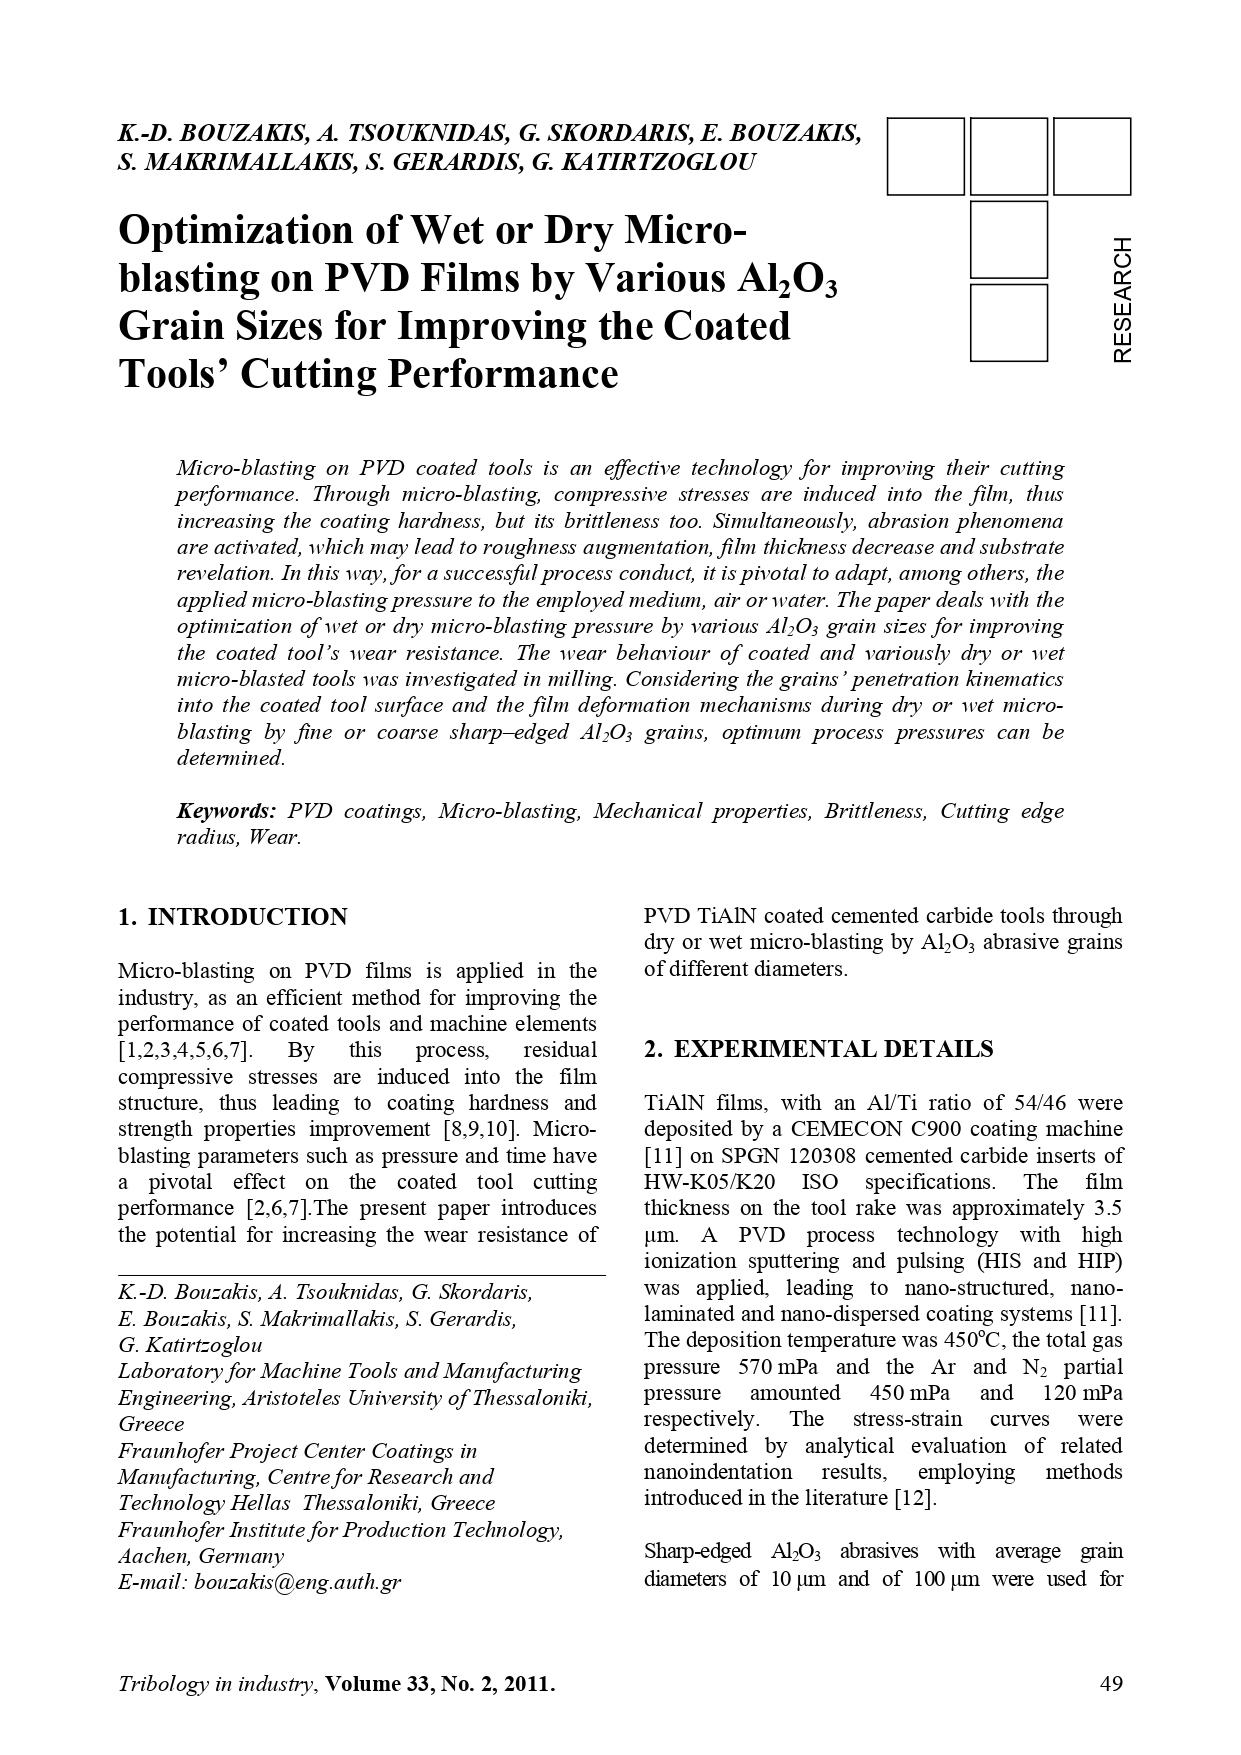 Optimization of wet or dry microblasting on PVD films by various Al2O3 grain sizes for improving the coated tools' cutting performance_page-0001.jpg